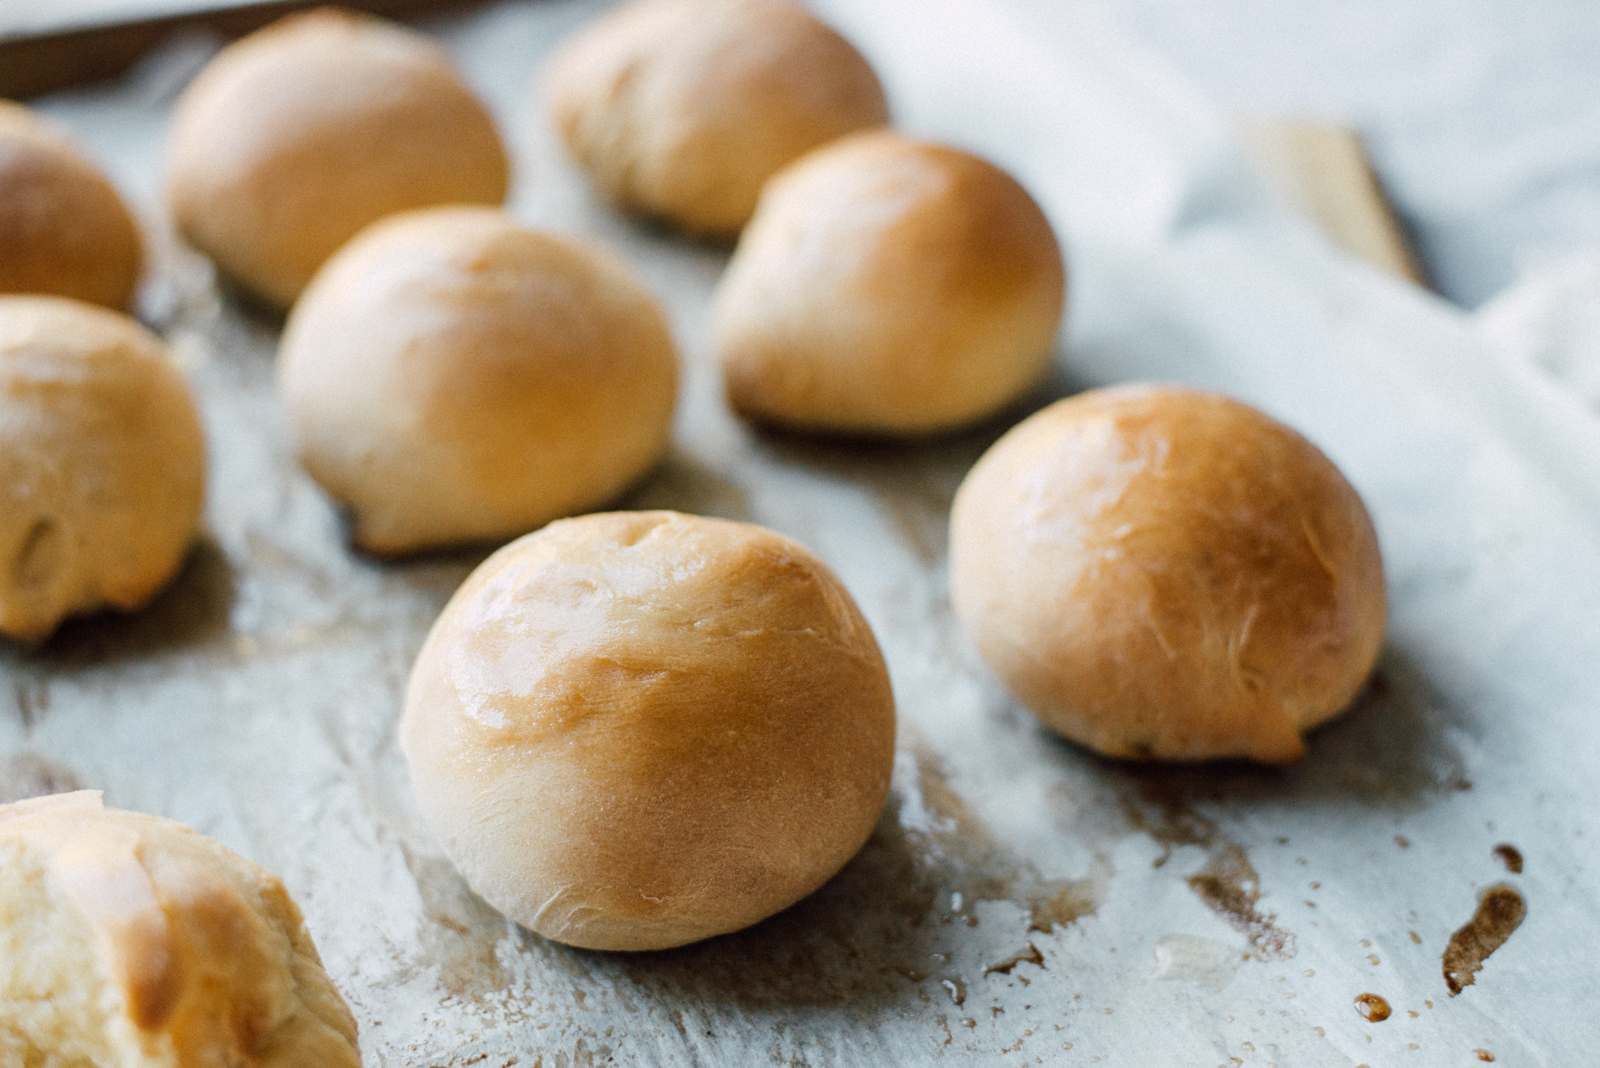 buttery yeast Thanksgiving parker house rolls freshly baked on parchment paper